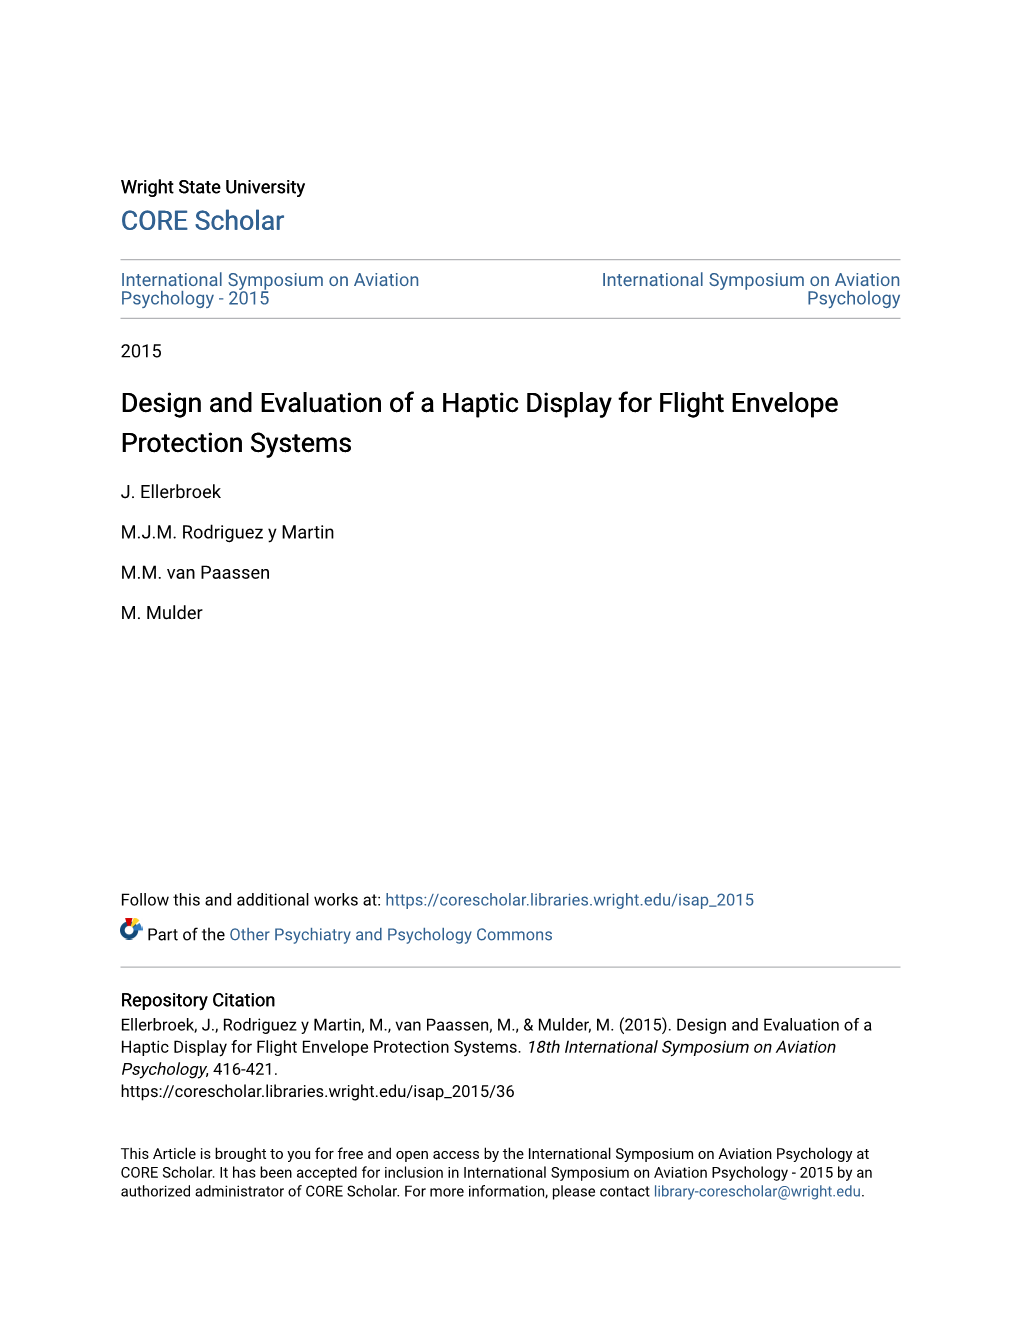 Design and Evaluation of a Haptic Display for Flight Envelope Protection Systems